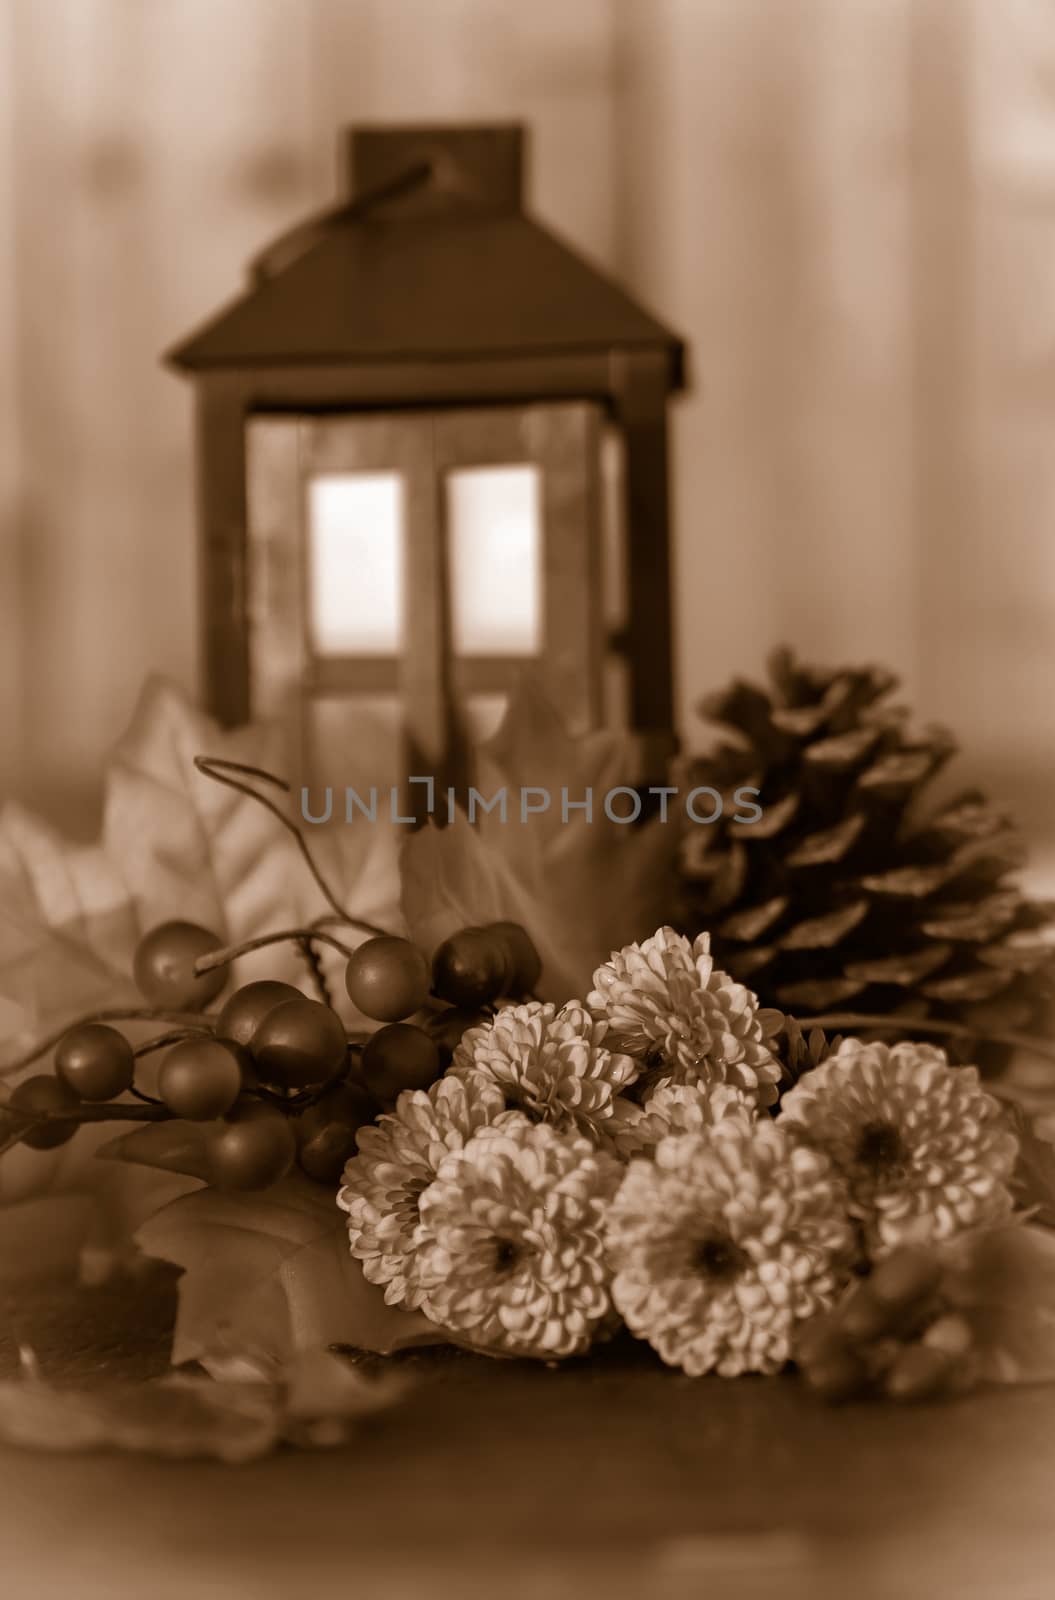 Fall or autumn flowers, pine cone and berries with sepia leaves and lantern on a vintage wooden background with shallow depth of field